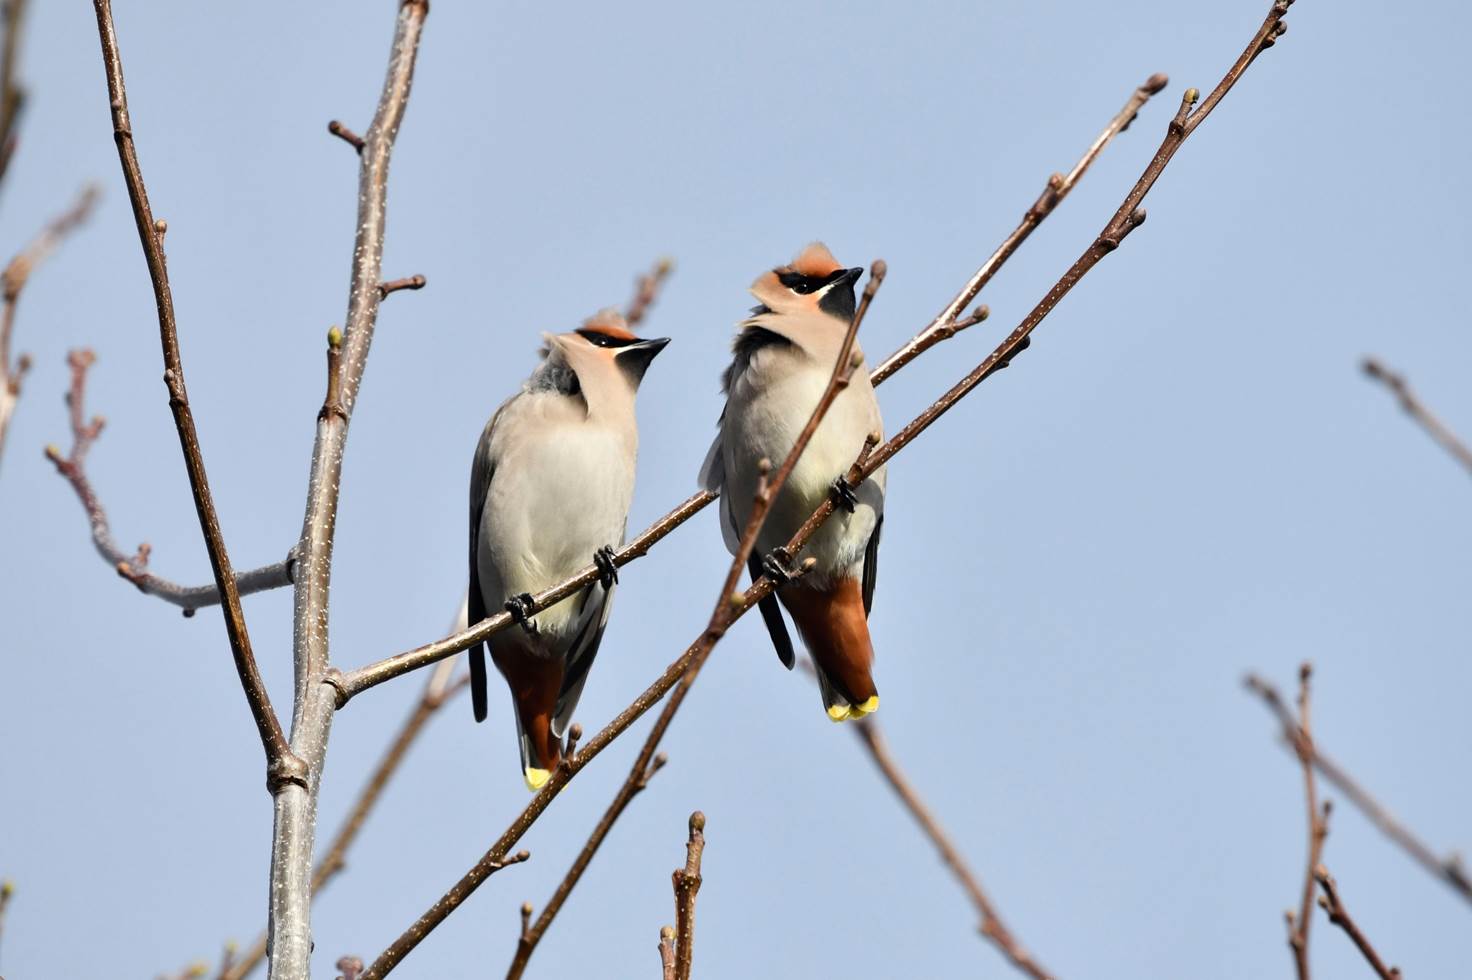 Two birds sitting on a branch

Description automatically generated